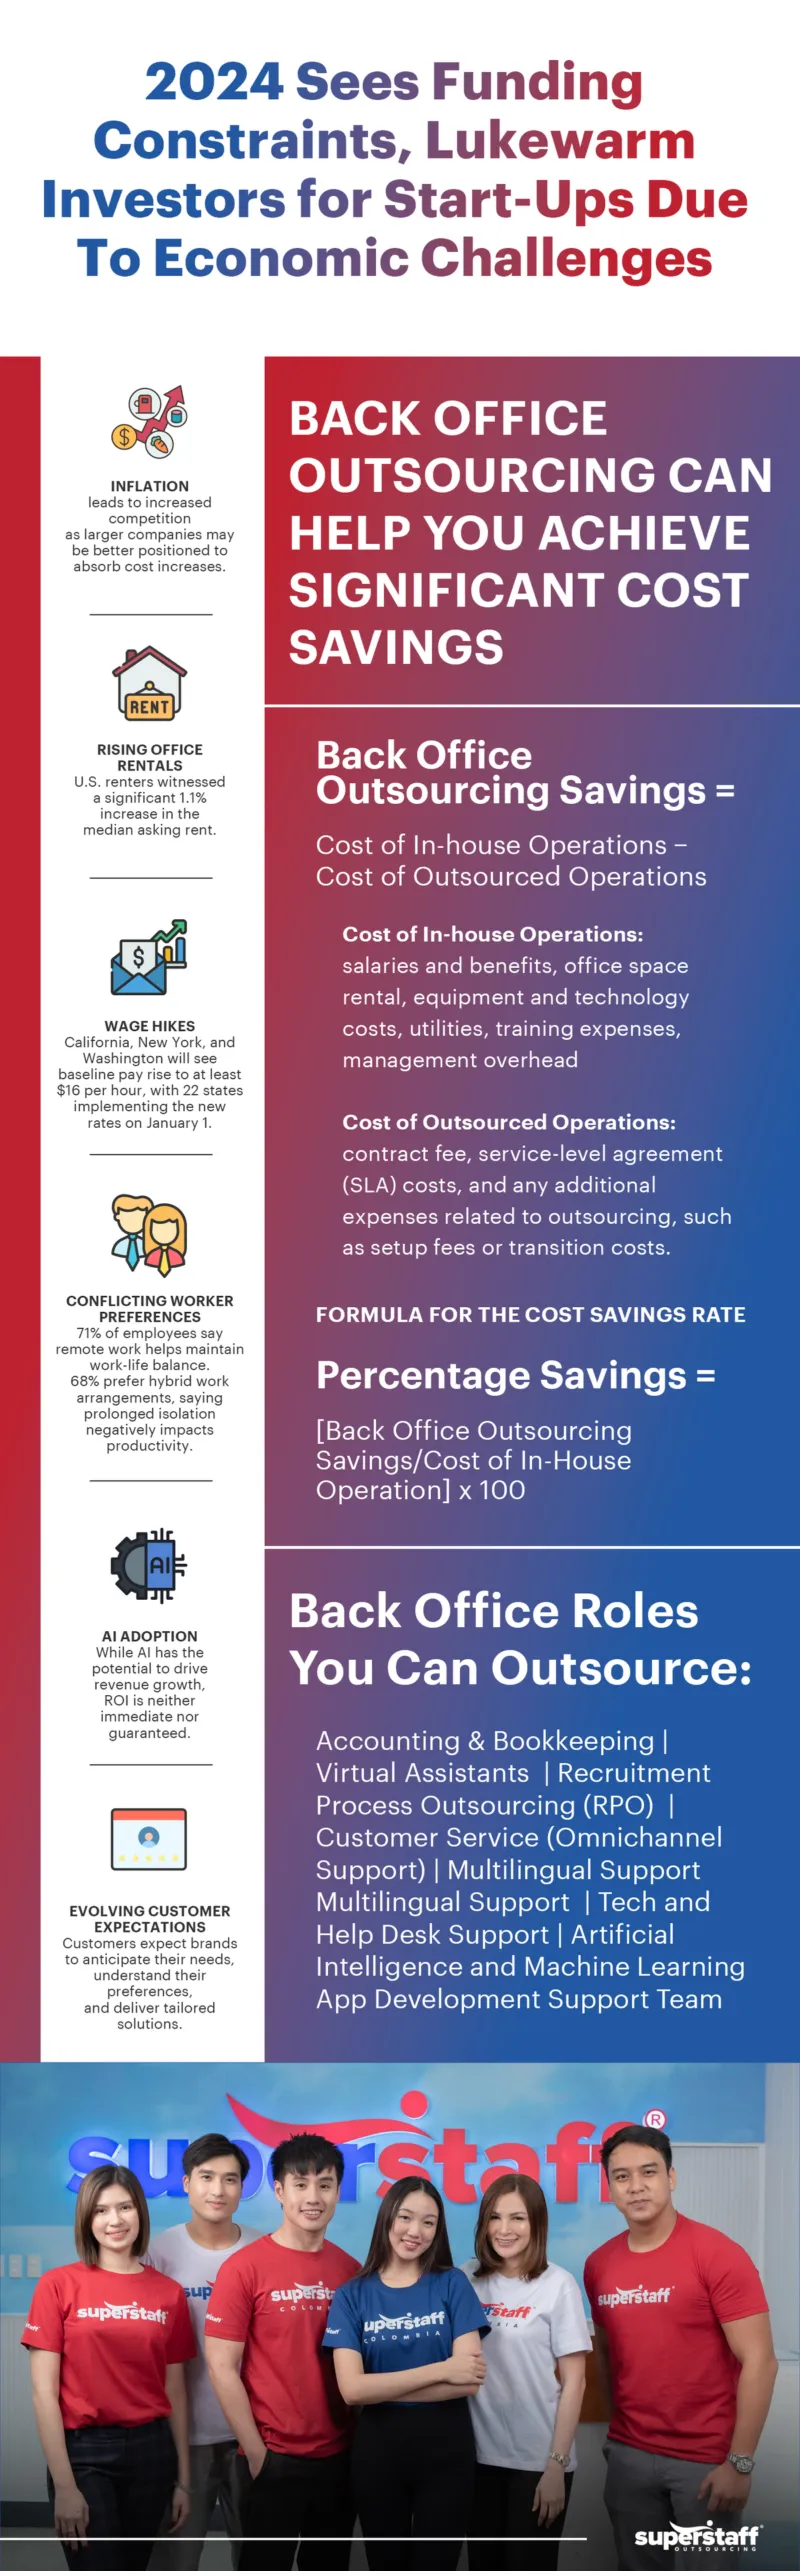 An infographic shows challenges for start-ups in 2024 and simple formula showing how Back Office Outsourcing to Call Center Philippines can save them cost.